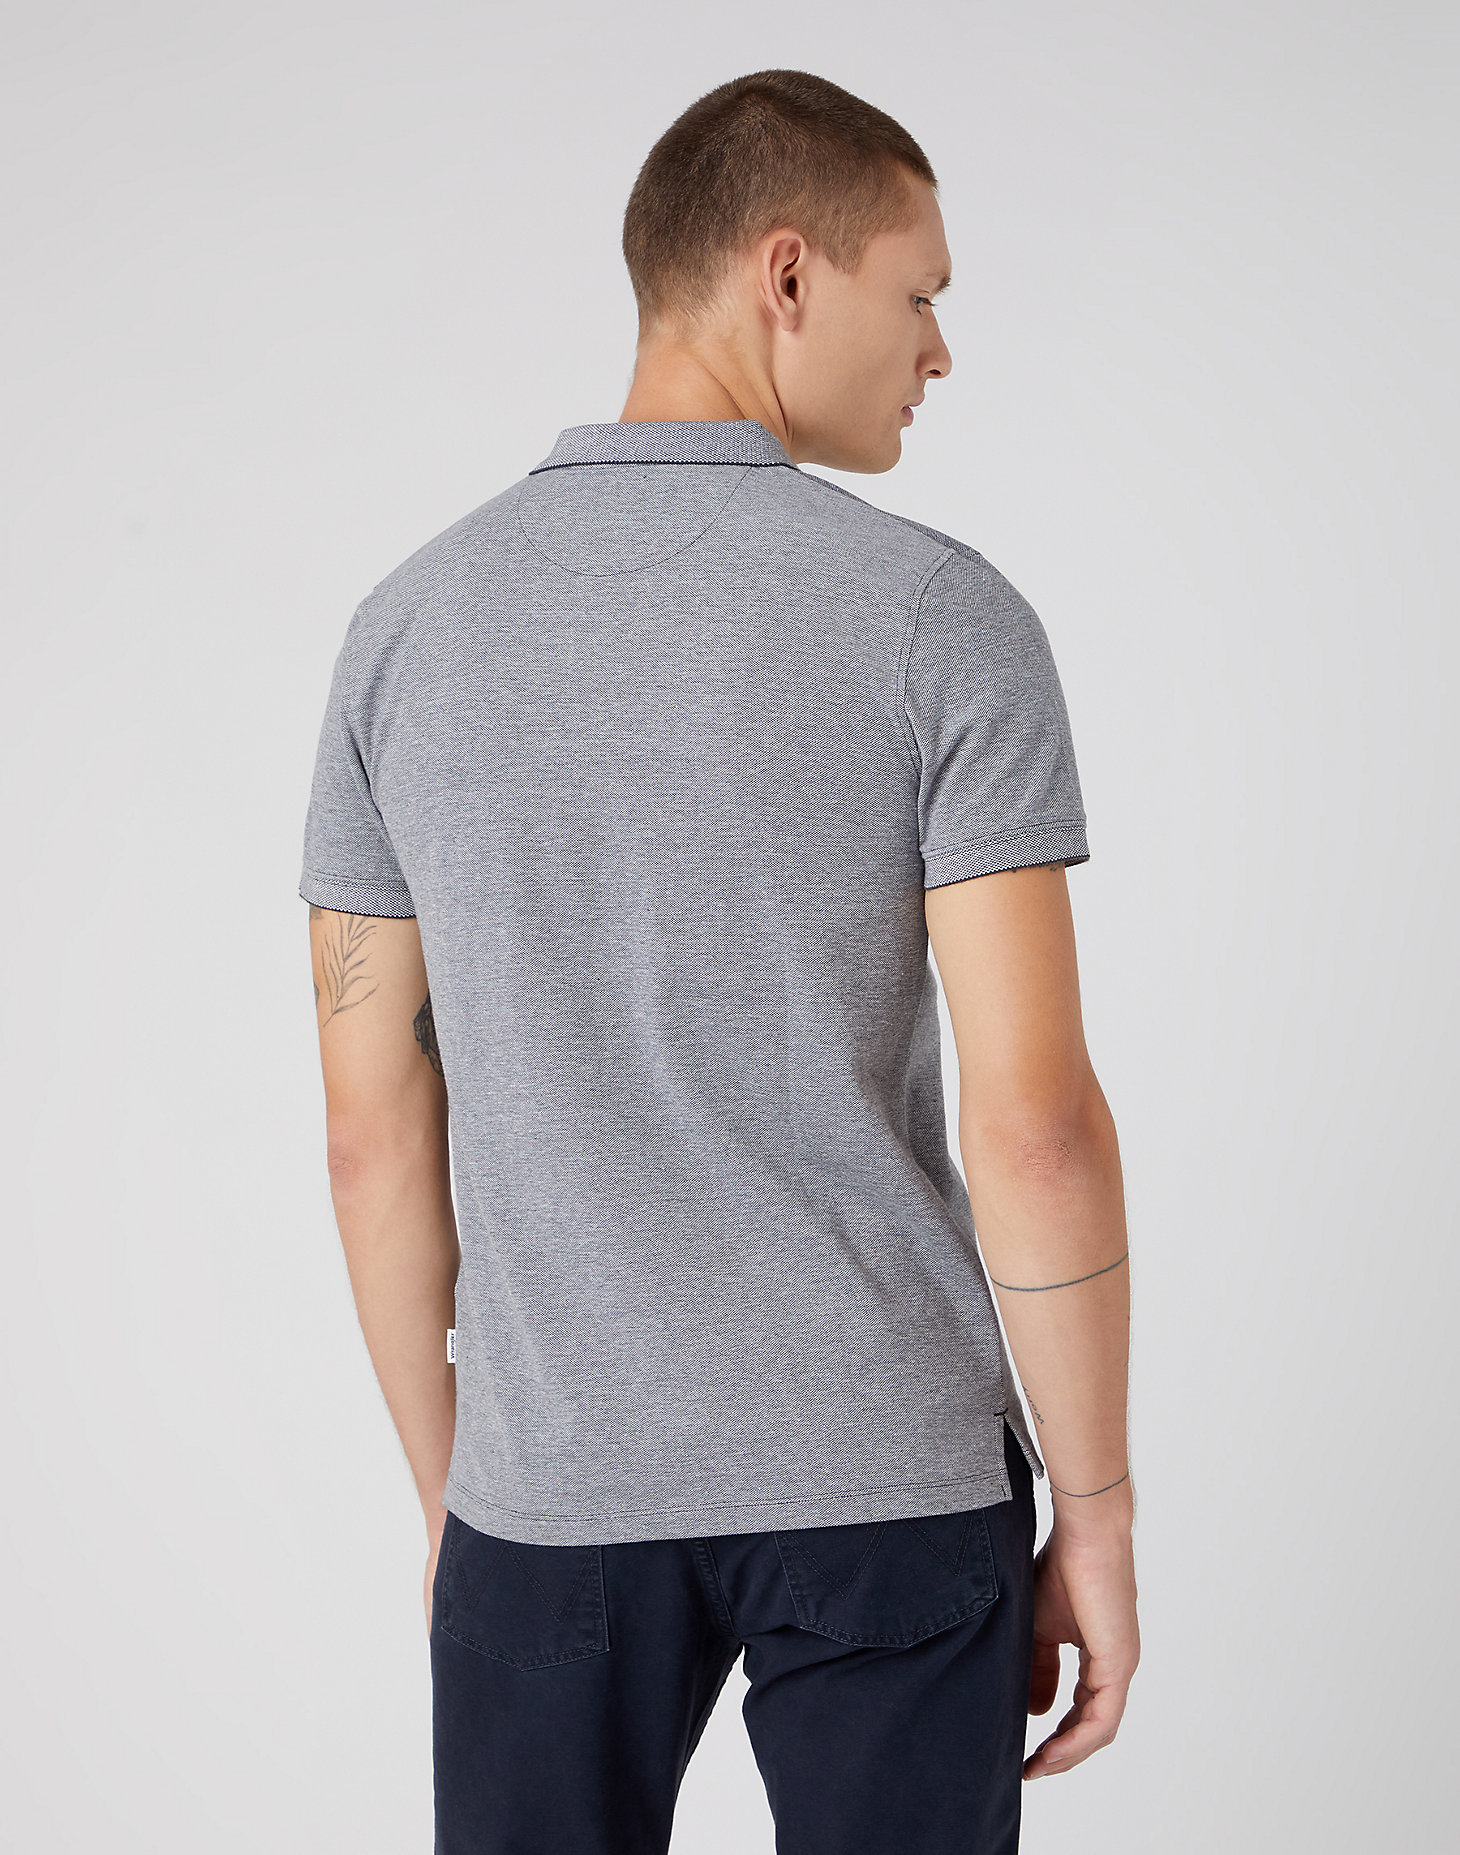 Refined Polo Shirt in Faded Black alternative view 2